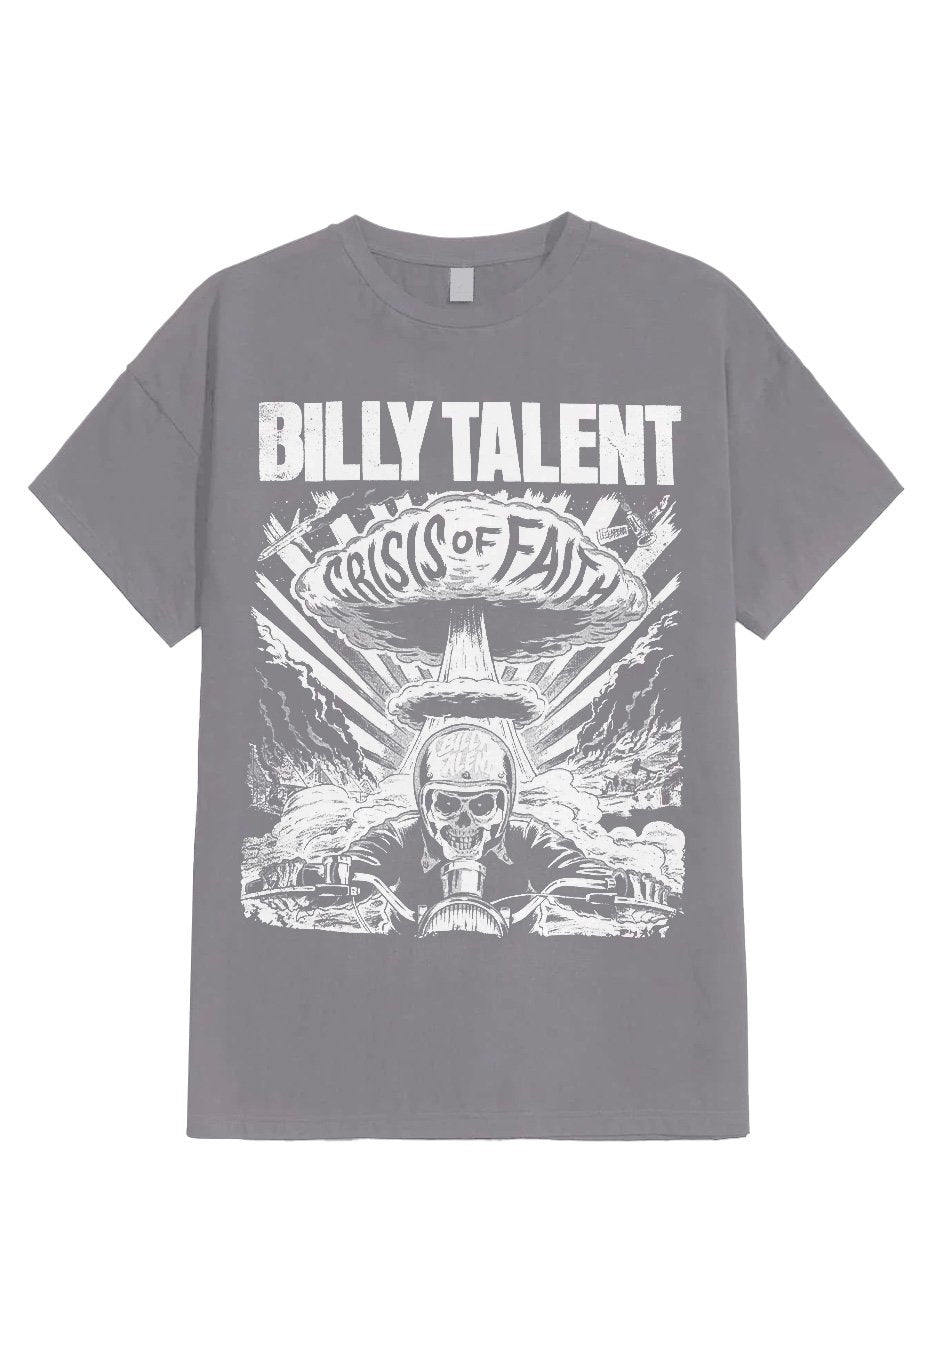 Billy Talent - Crisis Of Faith Cover Distressed Charcoal - T-Shirt